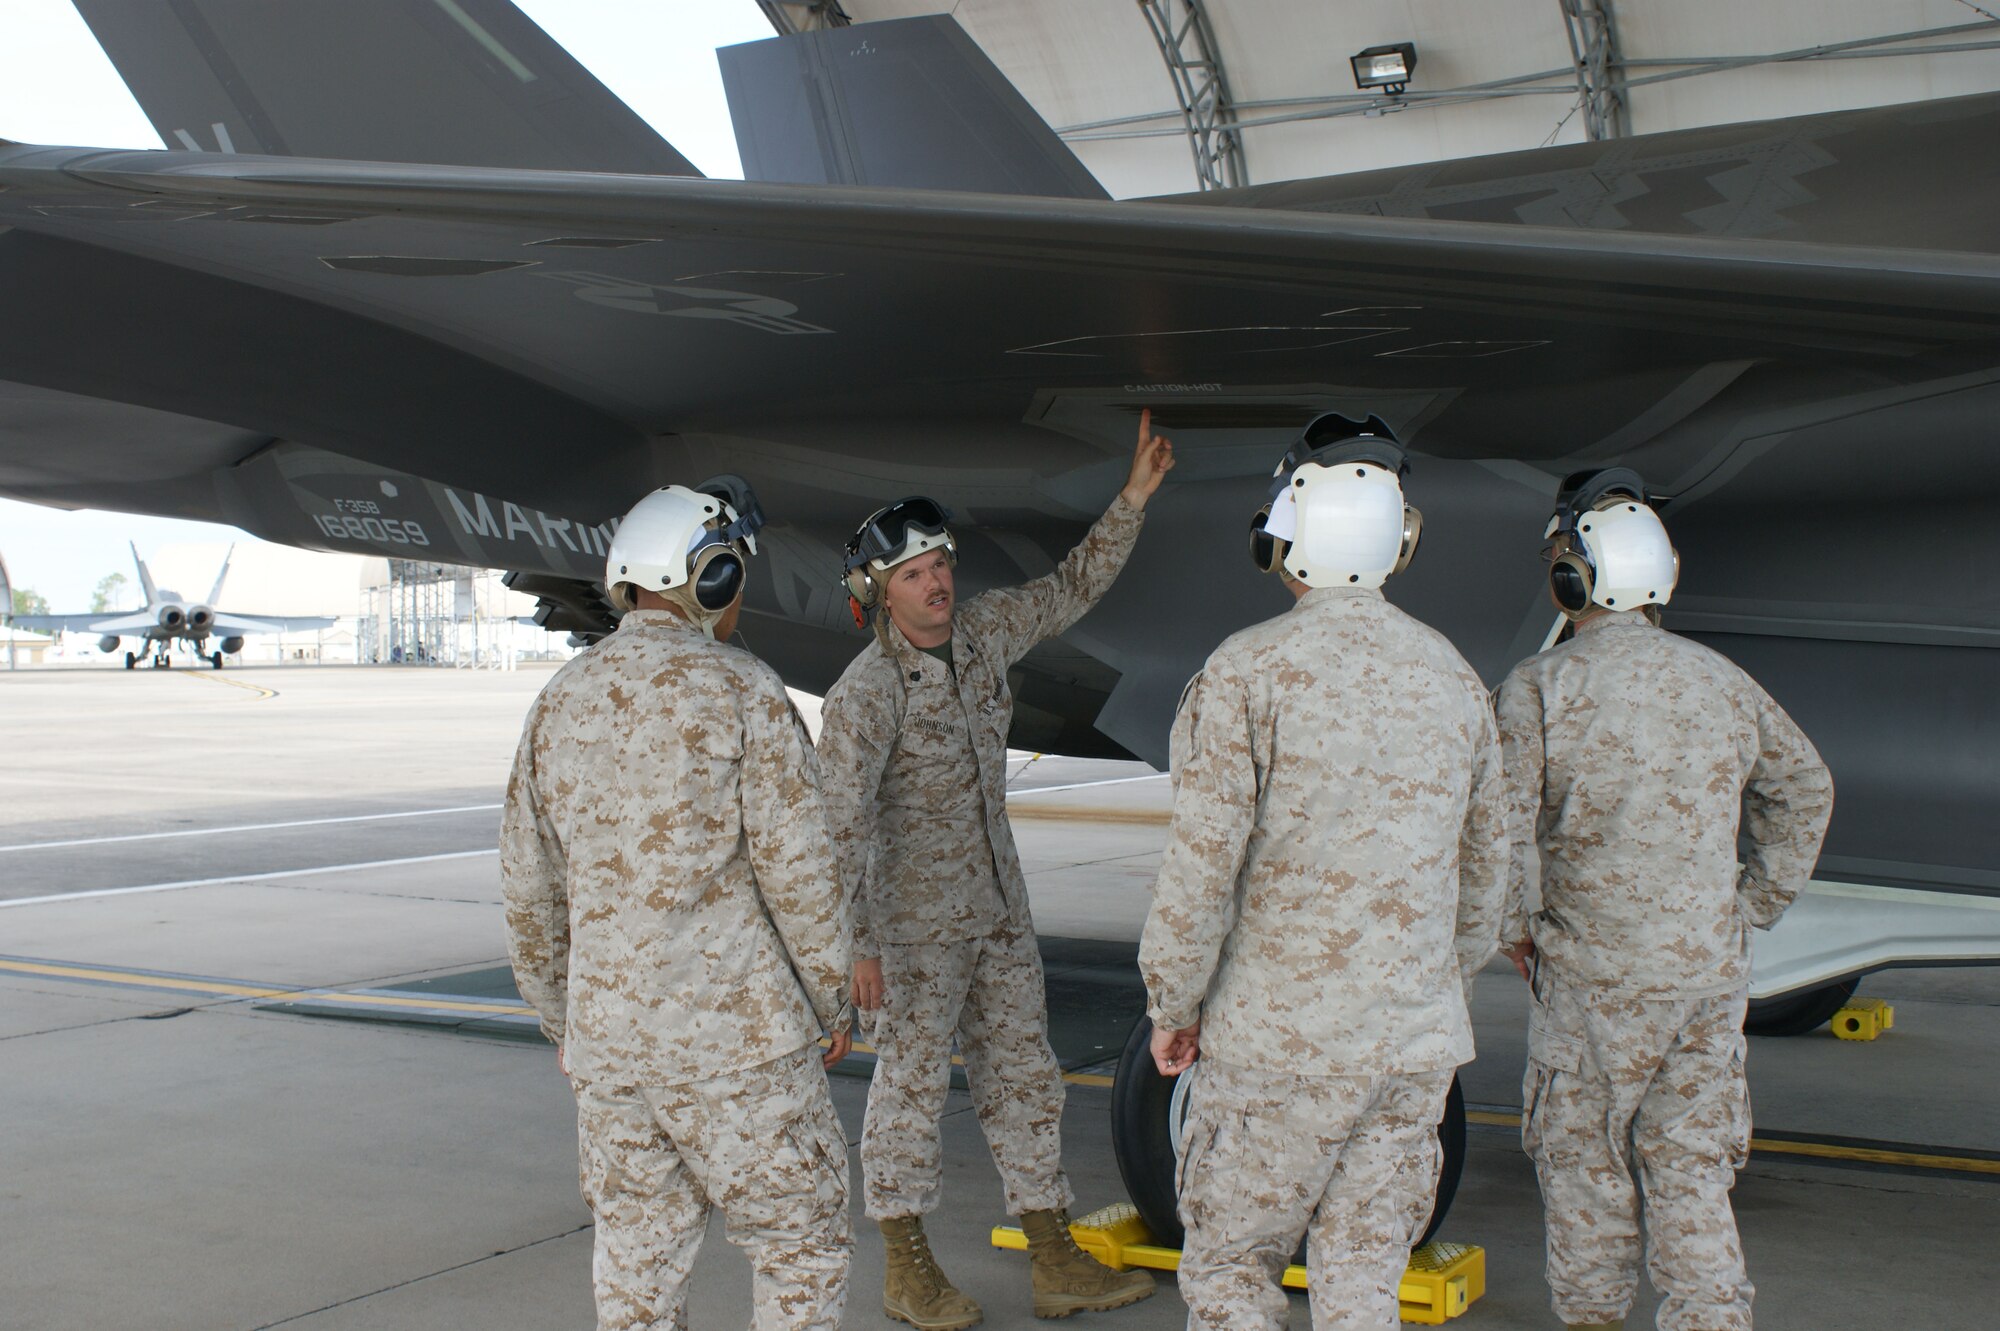 Students learn about the F-35B Lightning II joint strike fighter's wing system from USMC Staff Sgt. Christopher Johnson (2nd from left) during training at Eglin Air Force Base, Fla., Jul. 19, 2012.  The USMC is standing up their first-ever field training detachment with the 372nd Training Squadron Detachment 19 at Eglin, part of the 982nd Training Group at Sheppard Air Force Base, Texas. (U.S. Air Force photo/Dan Hawkins)